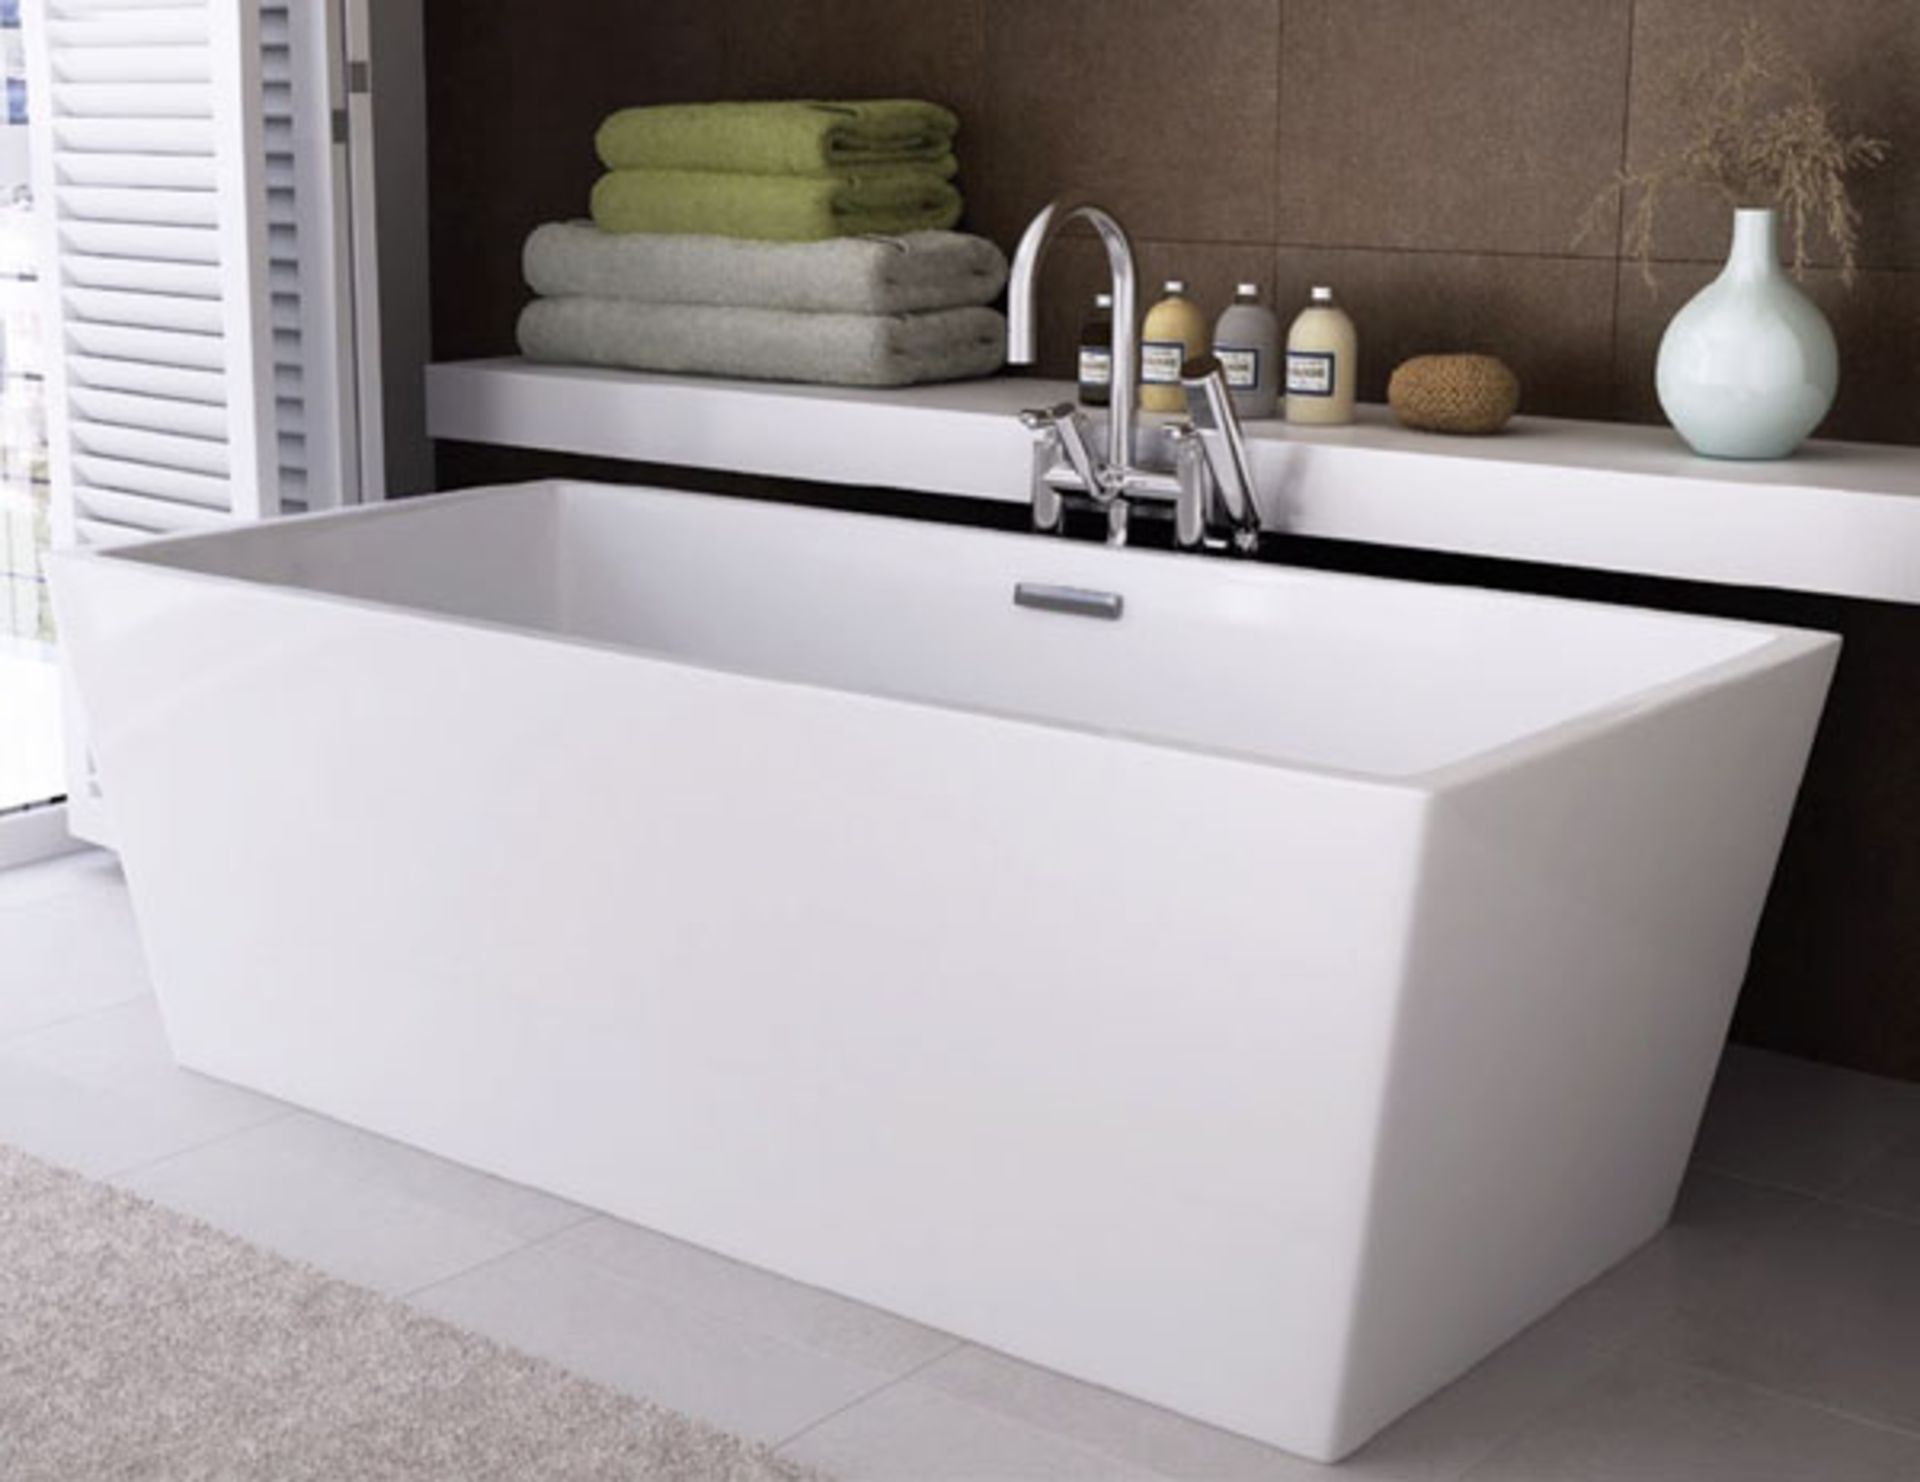 NEW (M5) 1600x800mm Hoxton Freestanding Bath. RRP £2,999.As a result of precise design Hoxton... - Image 5 of 5